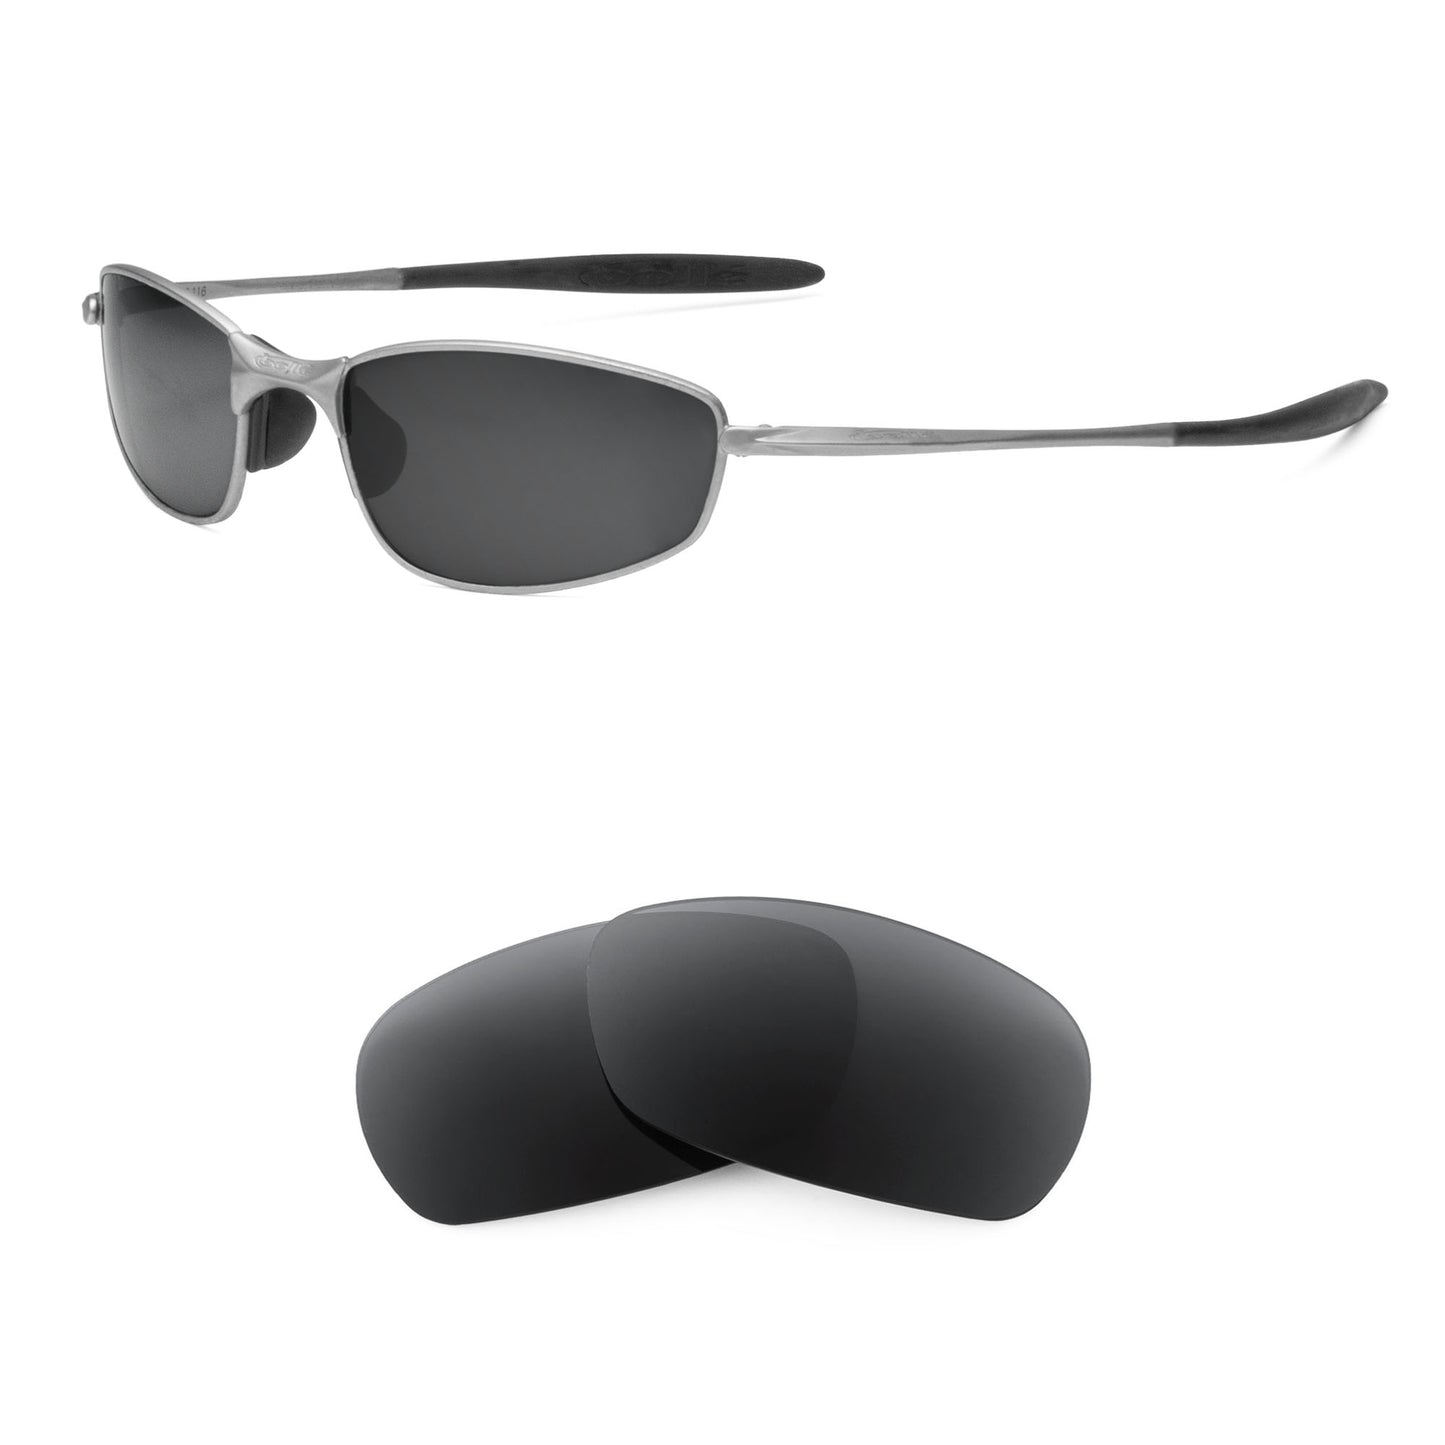 Bolle Meanstreak sunglasses with replacement lenses